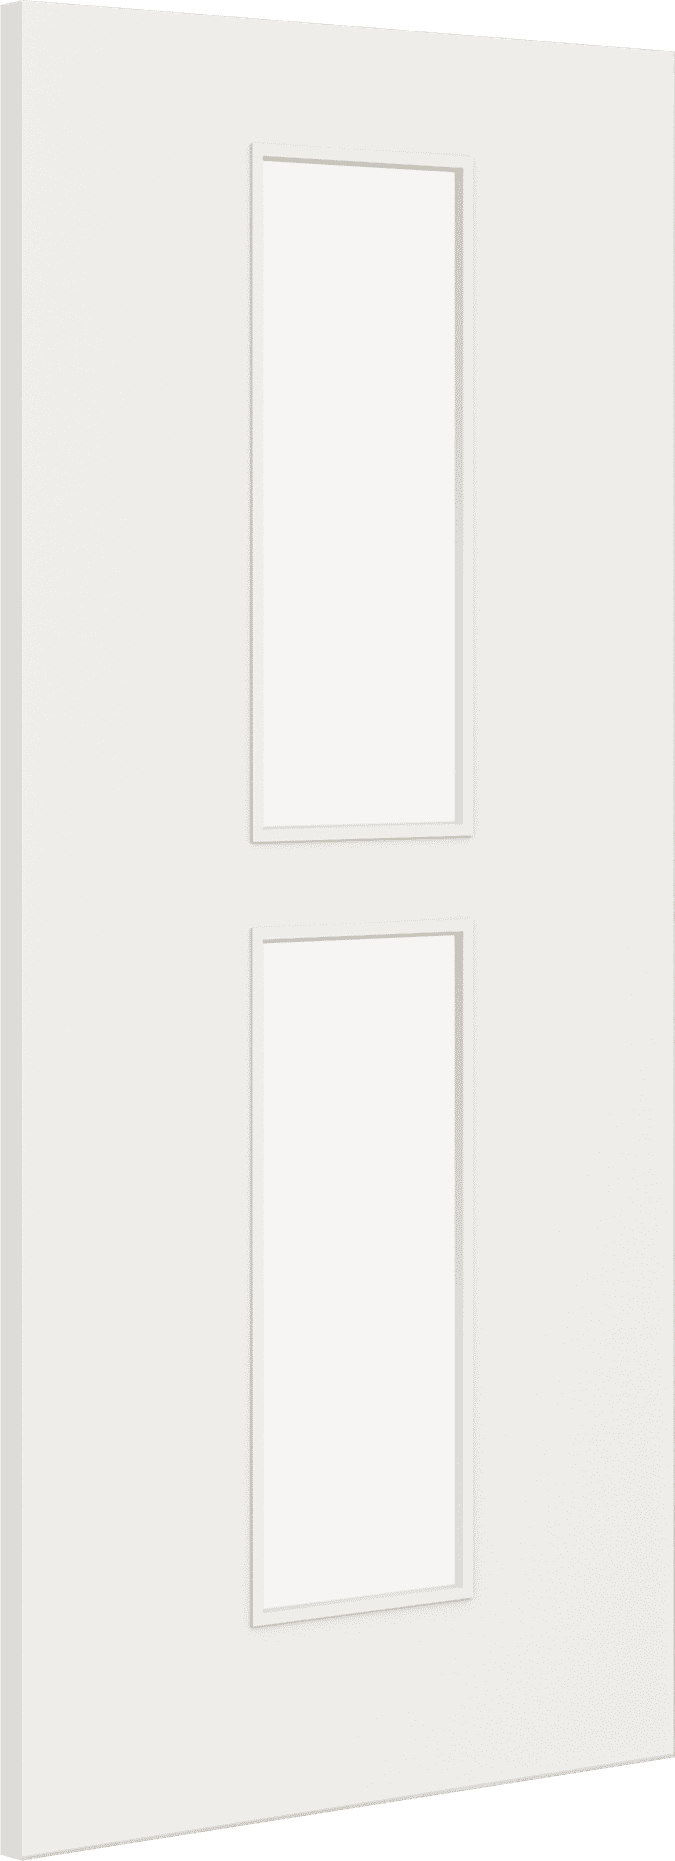 1981mm x 686mm x 44mm (27") Architectural Paint Grade White 12 Clear Glazed Fire Door Blank